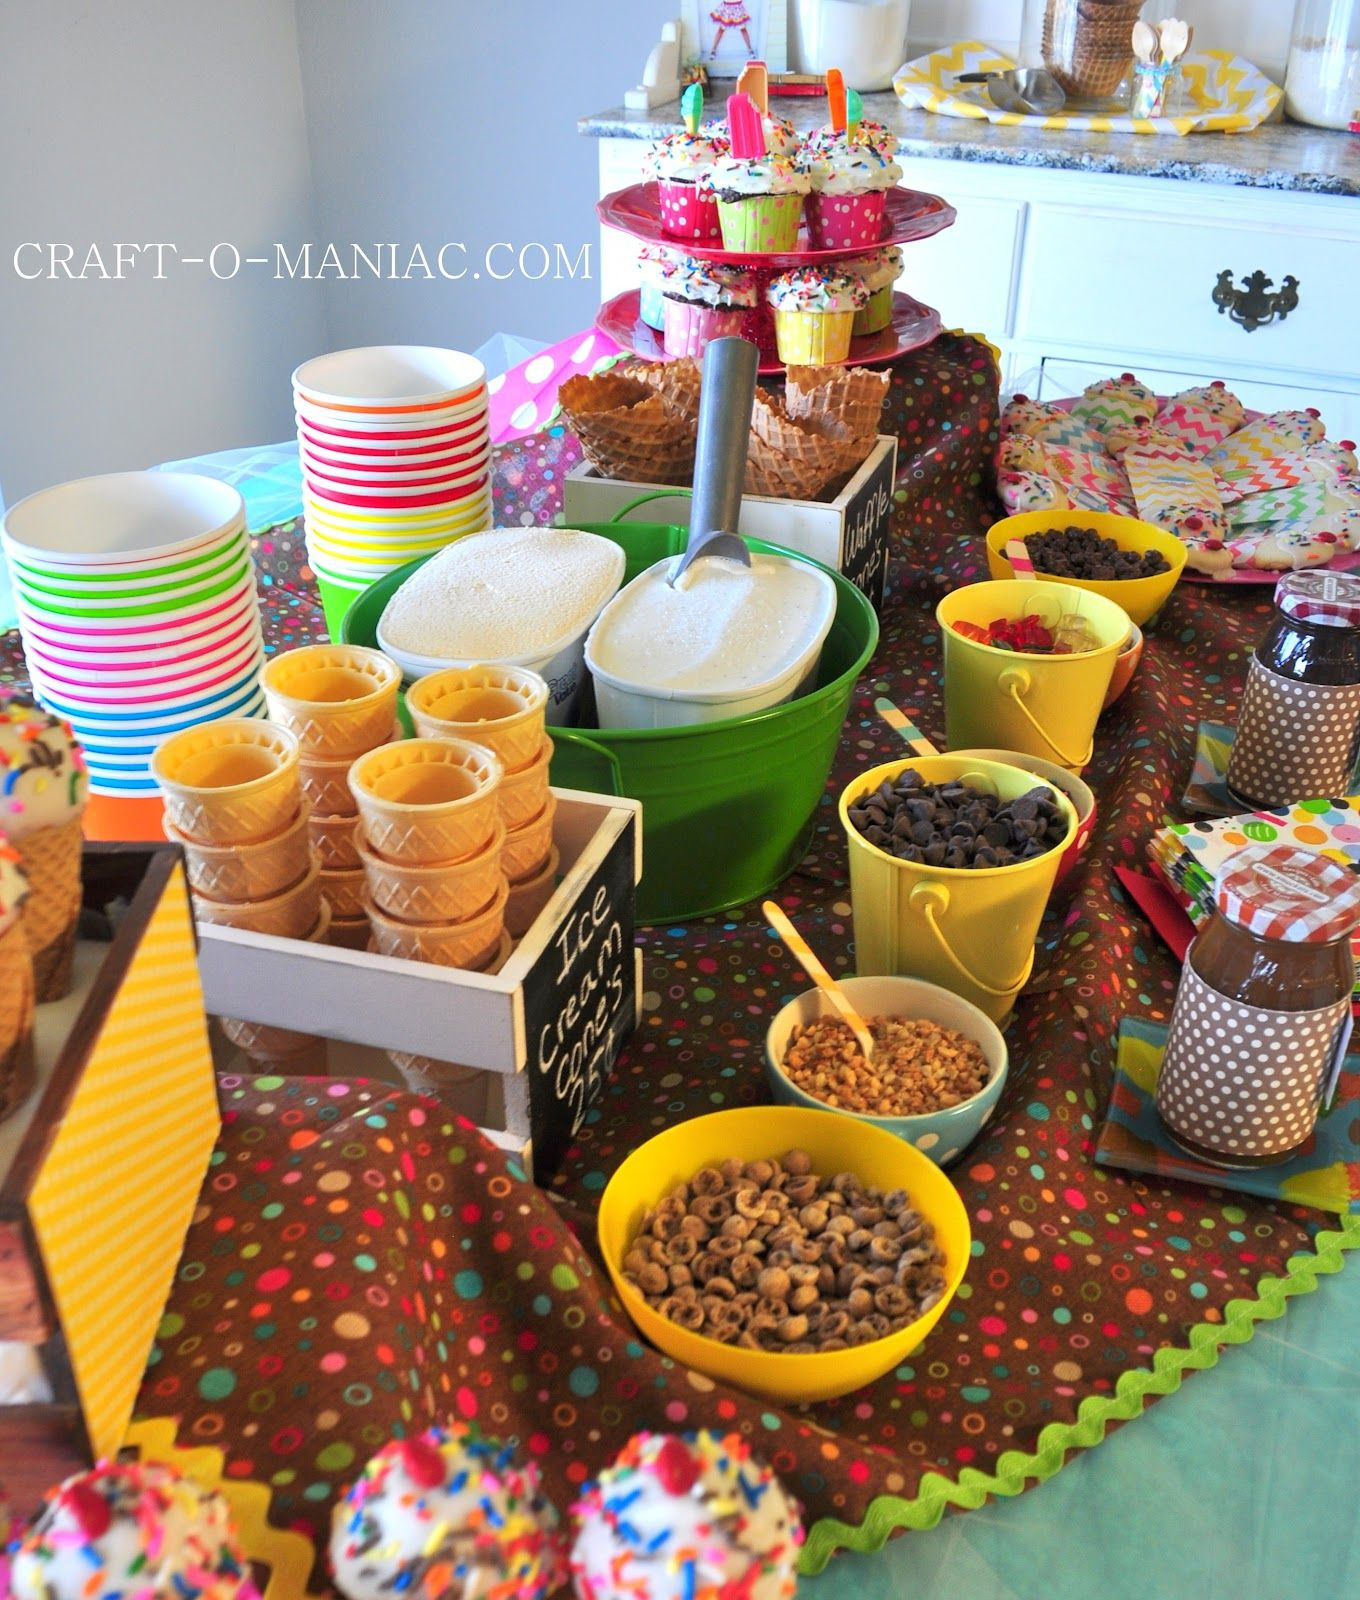 Ideas For A Summer Party
 Best 25 Summer party themes ideas on Pinterest